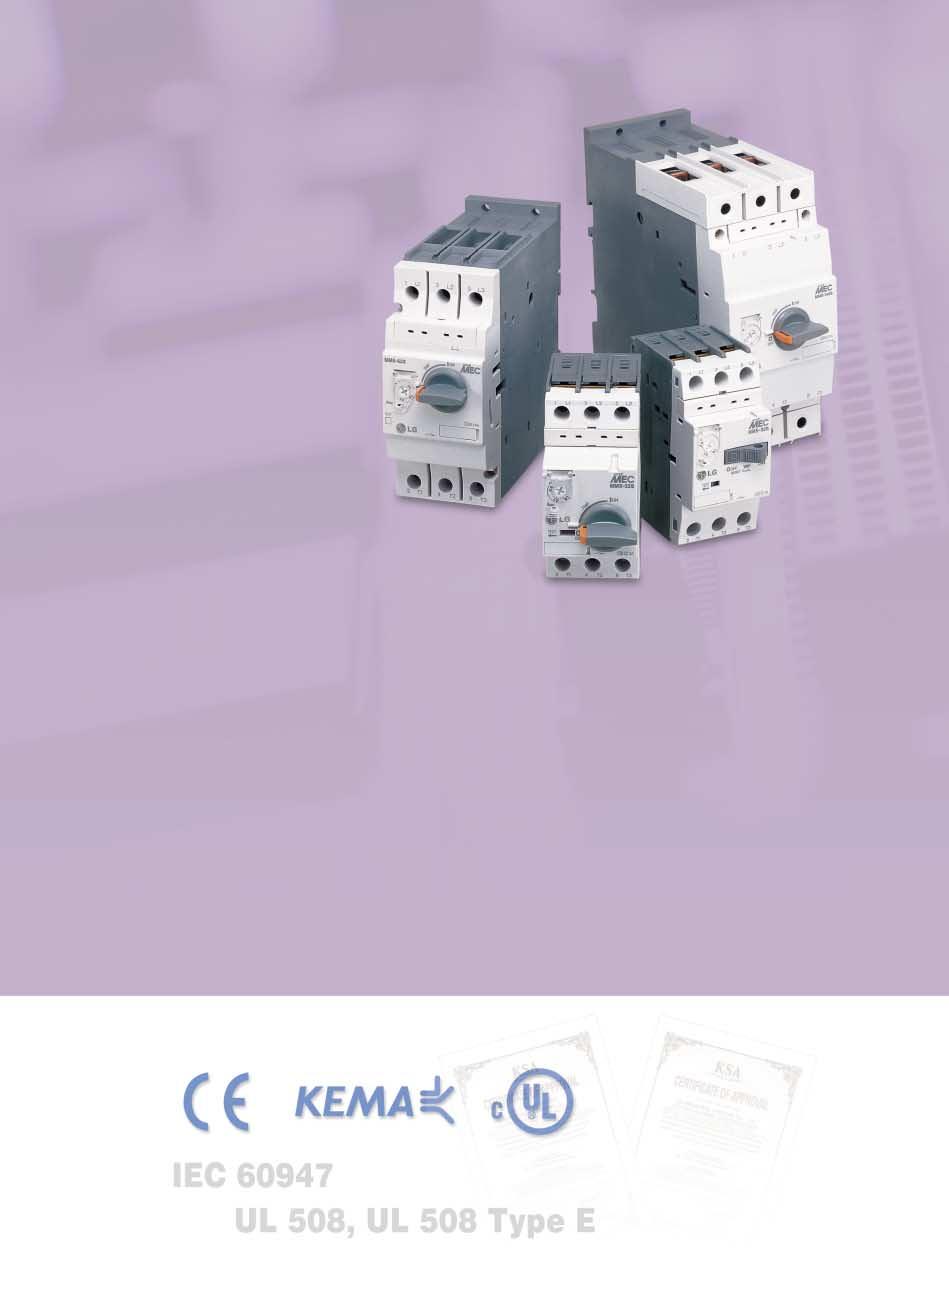 Function Protection of group installation Protection of circuits Motor protection Starter protection Wide range of ambient temperature compensation Phase failure protection Feature 45mm width up to